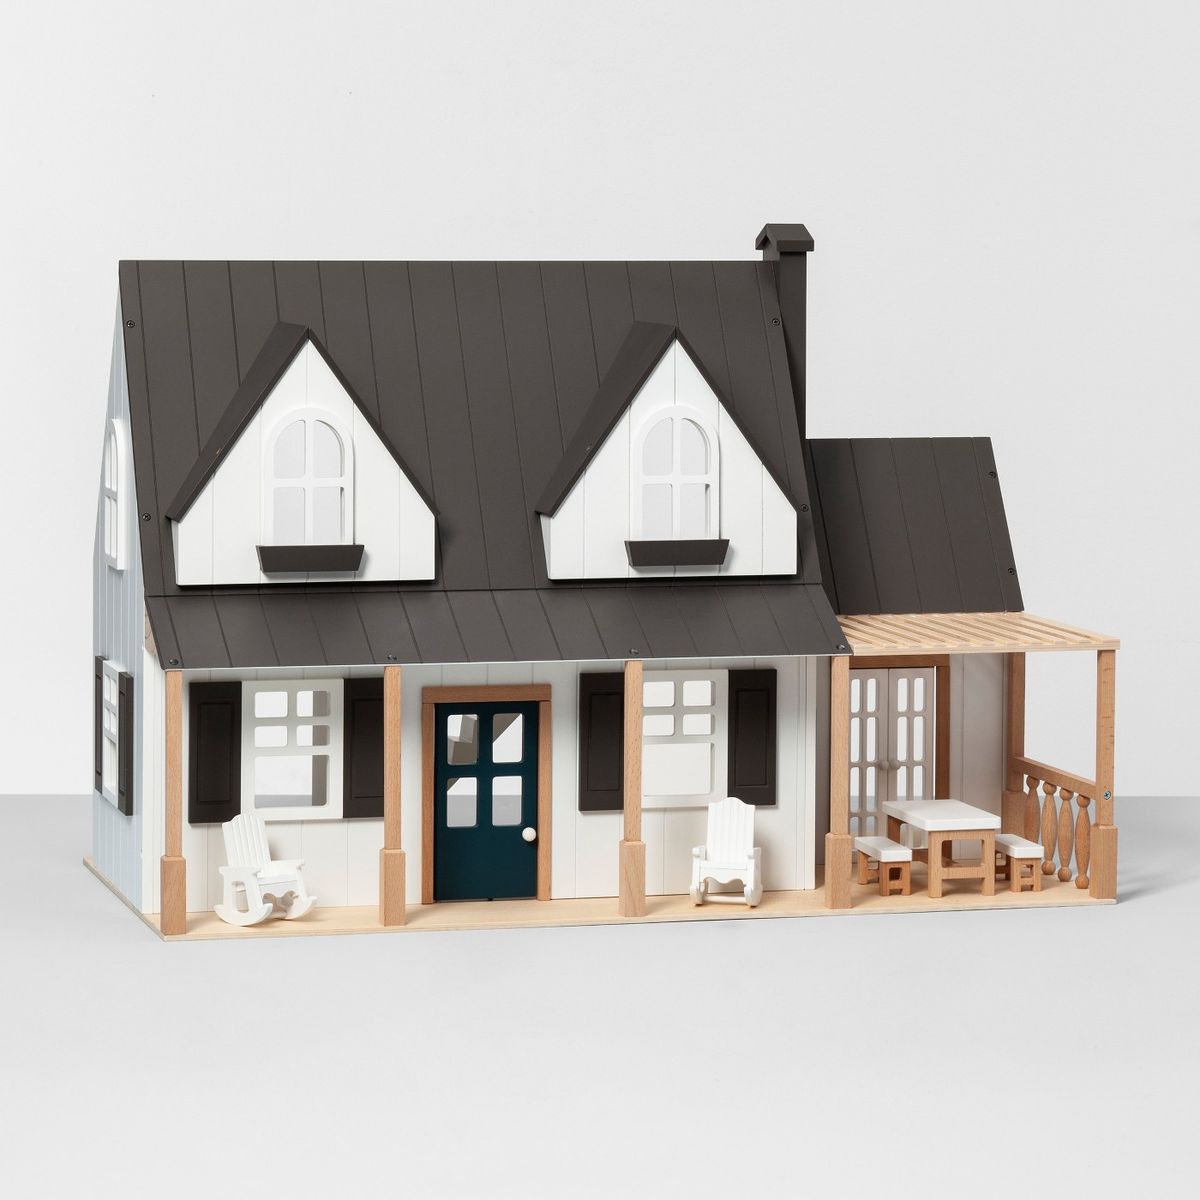 House, Property, Home, Dollhouse, Building, Architecture, Real estate, Cottage, Scale model, Roof, 